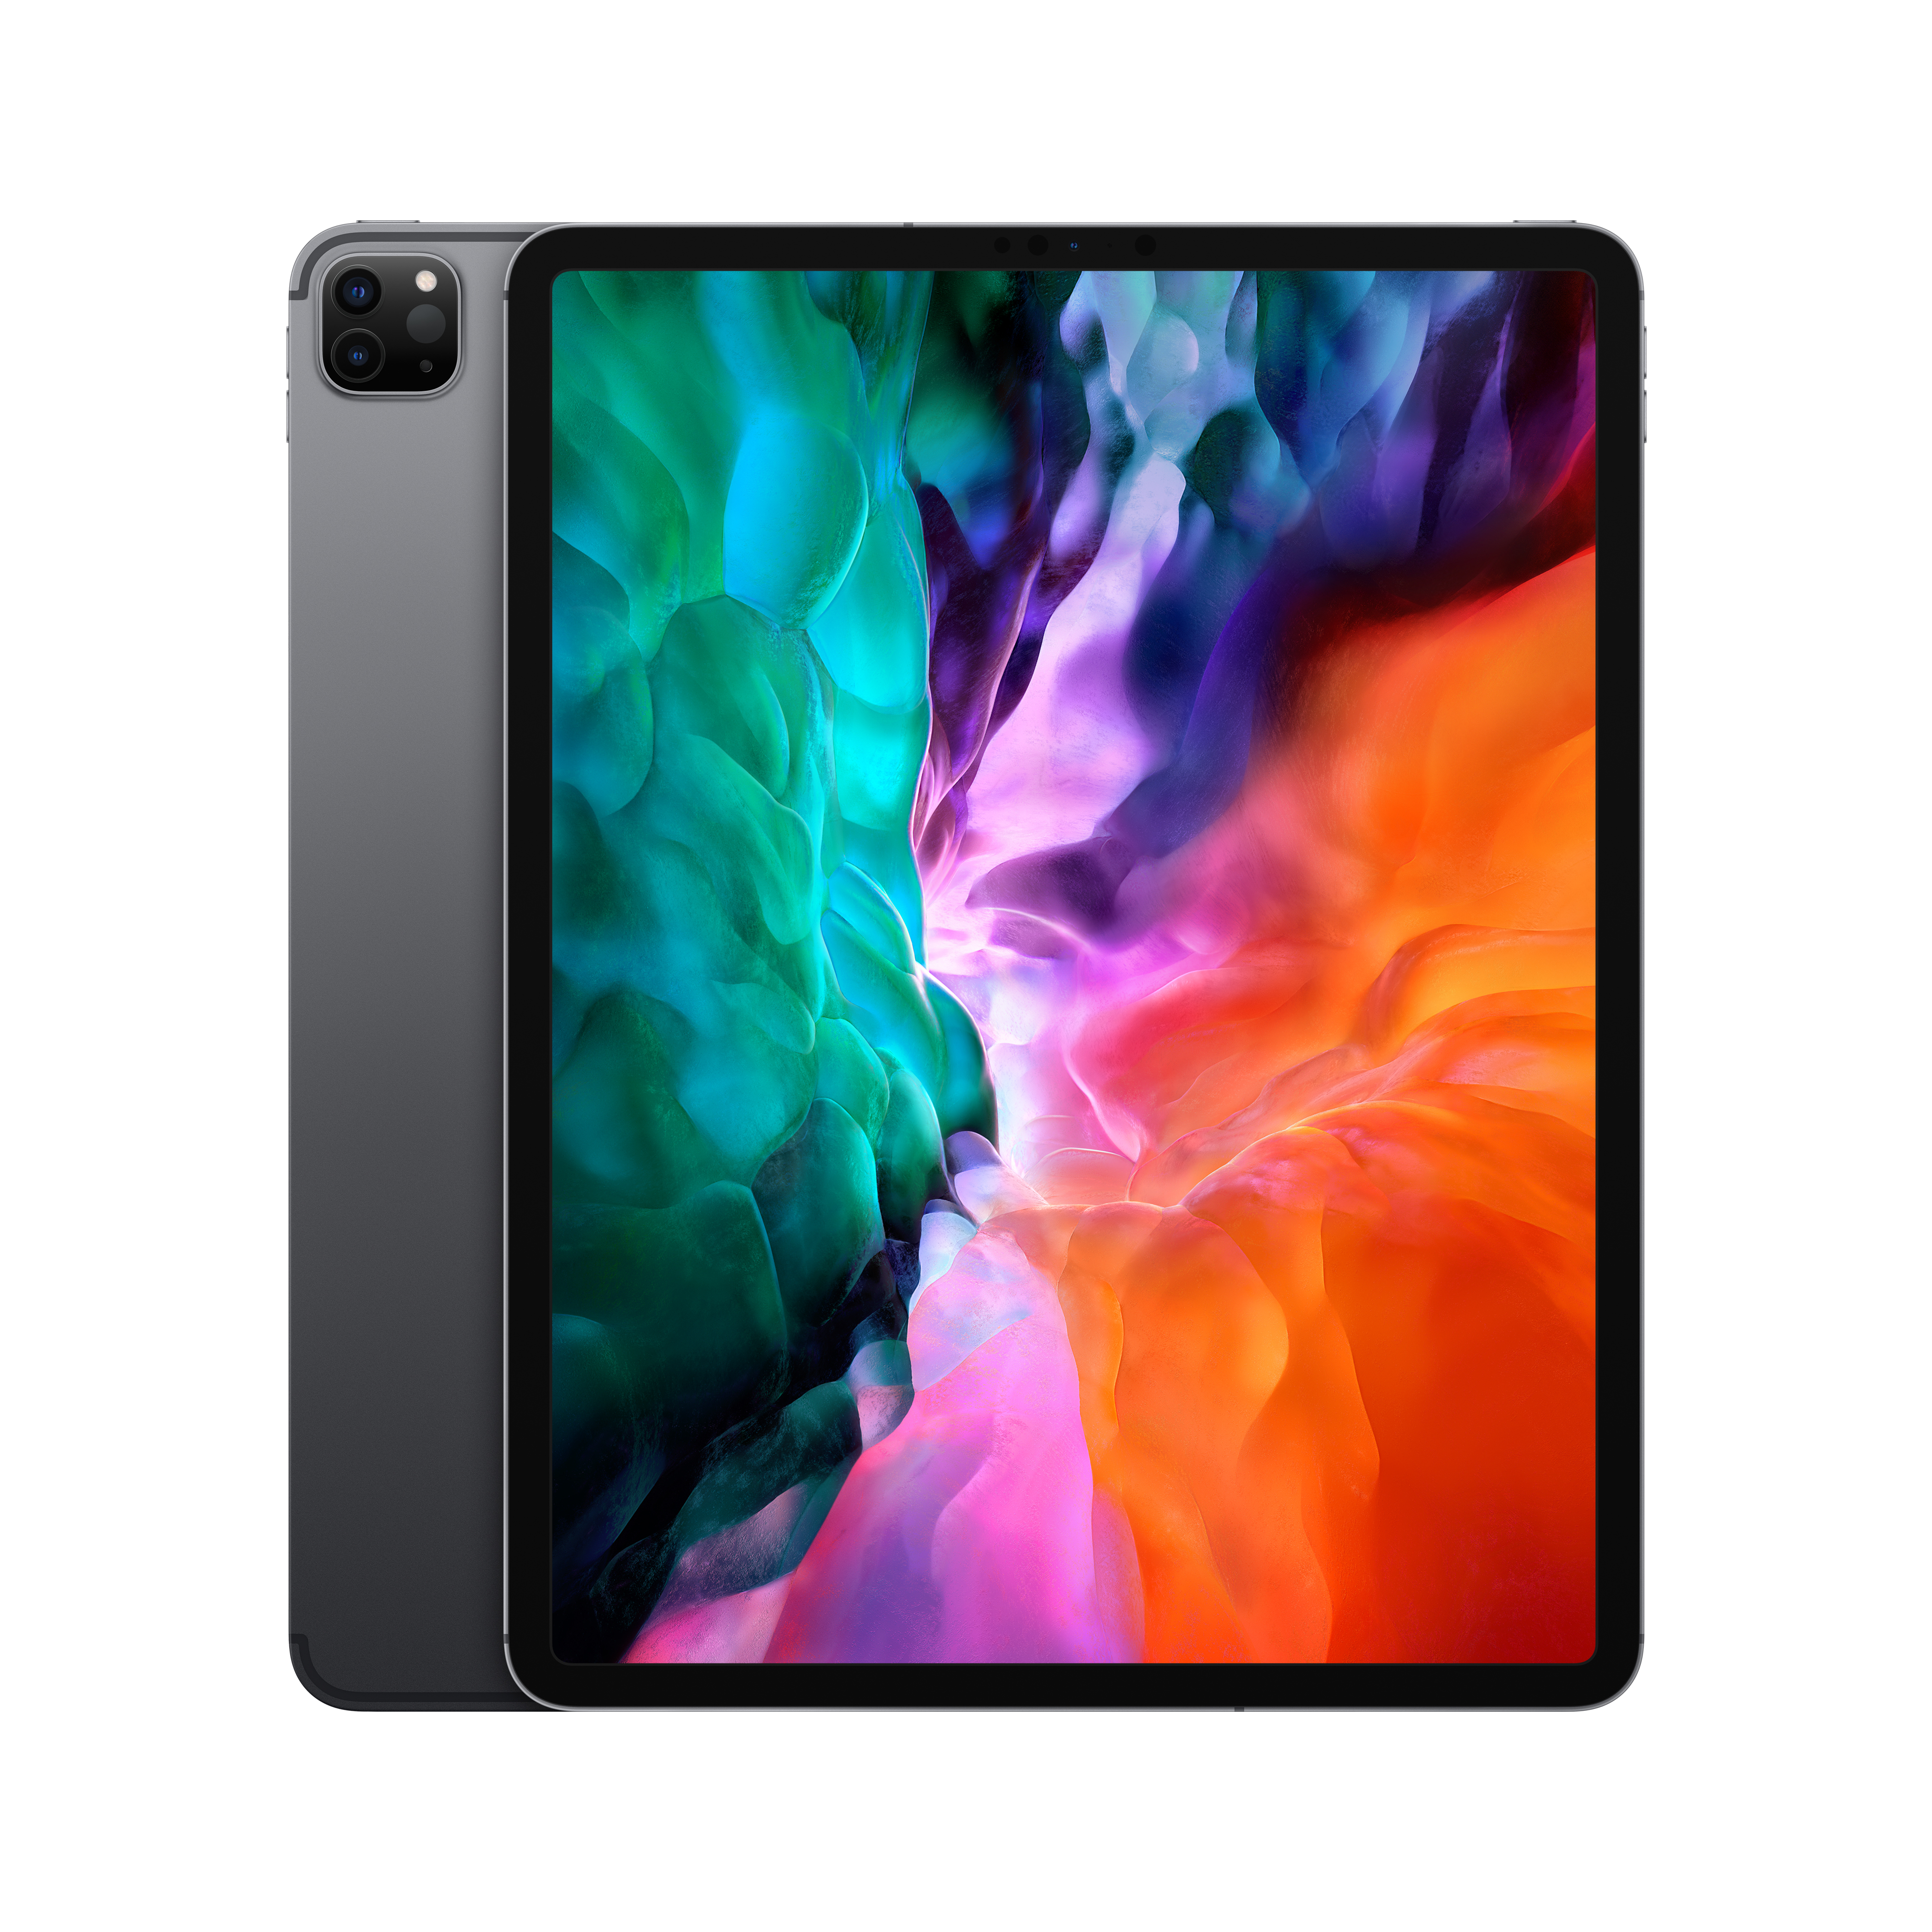 Apple 12.9-inch iPad Pro (2020) Wi-Fi + Cellular 512GB - Space Gray - image 4 of 10